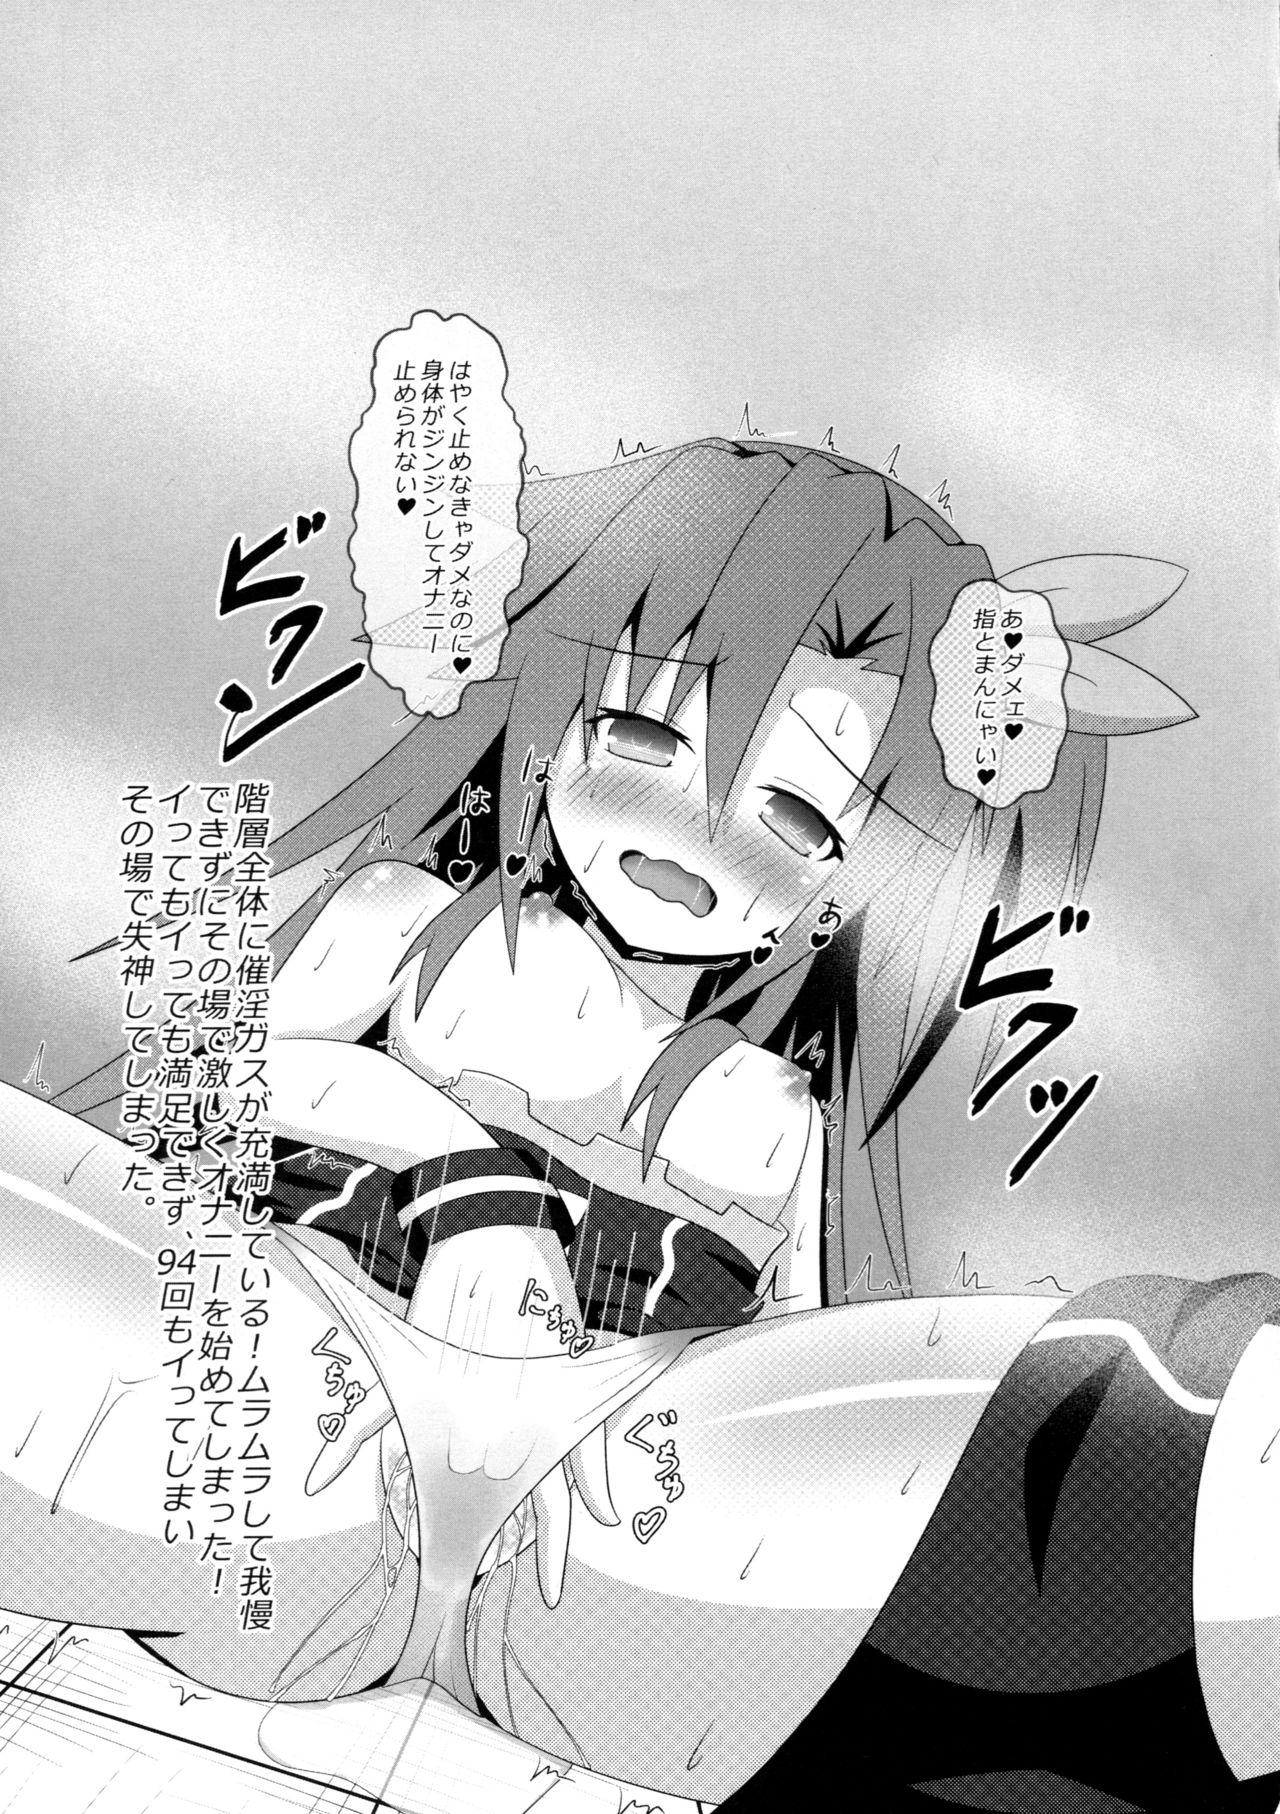 Gapes Gaping Asshole IF-chan to Ero Trap Dungeon - Hyperdimension neptunia Gay Dudes - Page 9